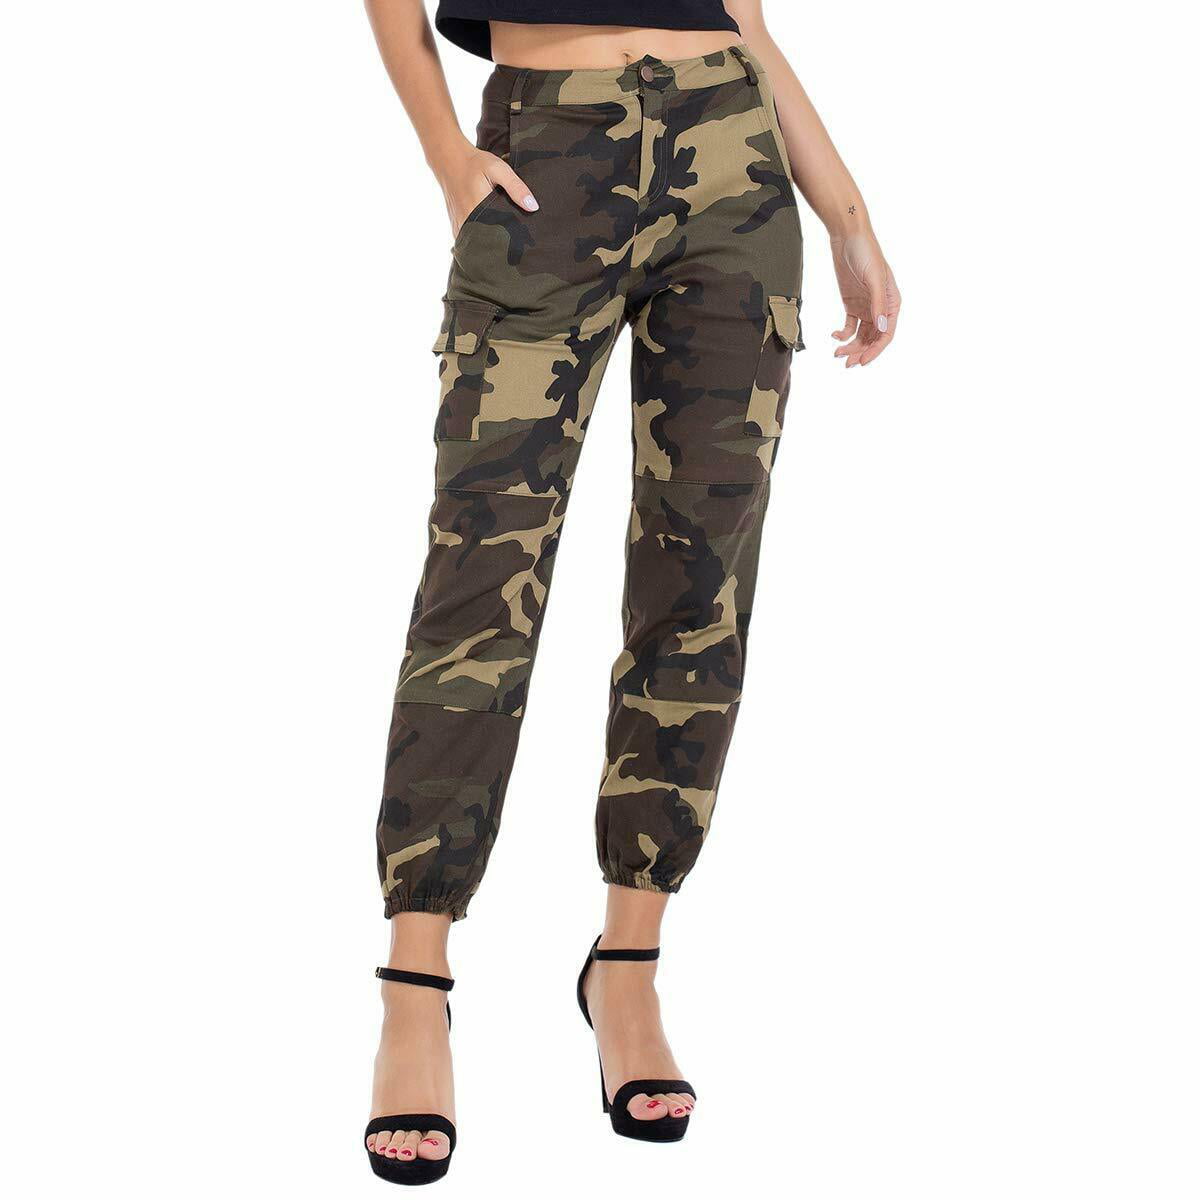 Calsunbaby - Women Camouflage Trouser Ladies Casual Military Cargo ...